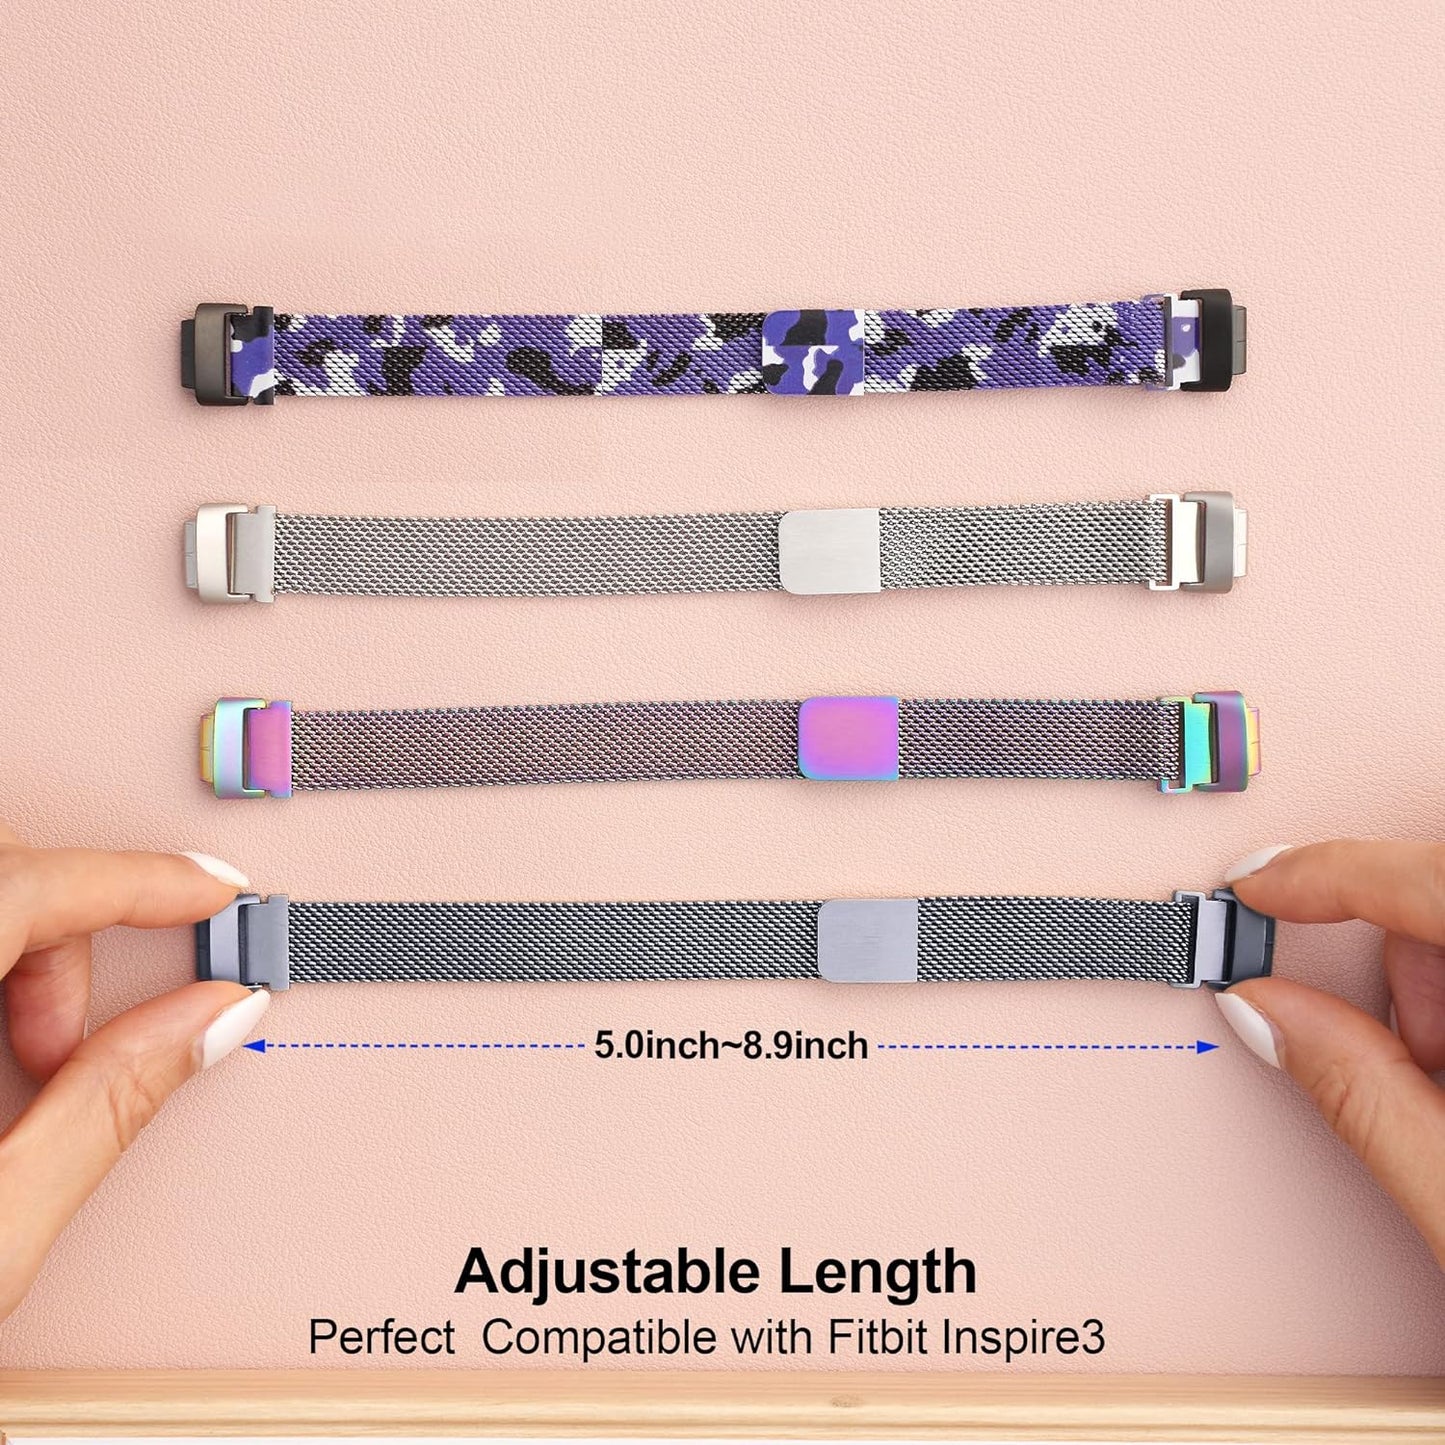 Wongeto for Fitbit Inspire 3 Bands Women Men, Stainless Steel Metal Mesh Loop Adjustable Magnetic Wristband Replacement Strap for Fitbit Inspire 3 Fitness Tracker